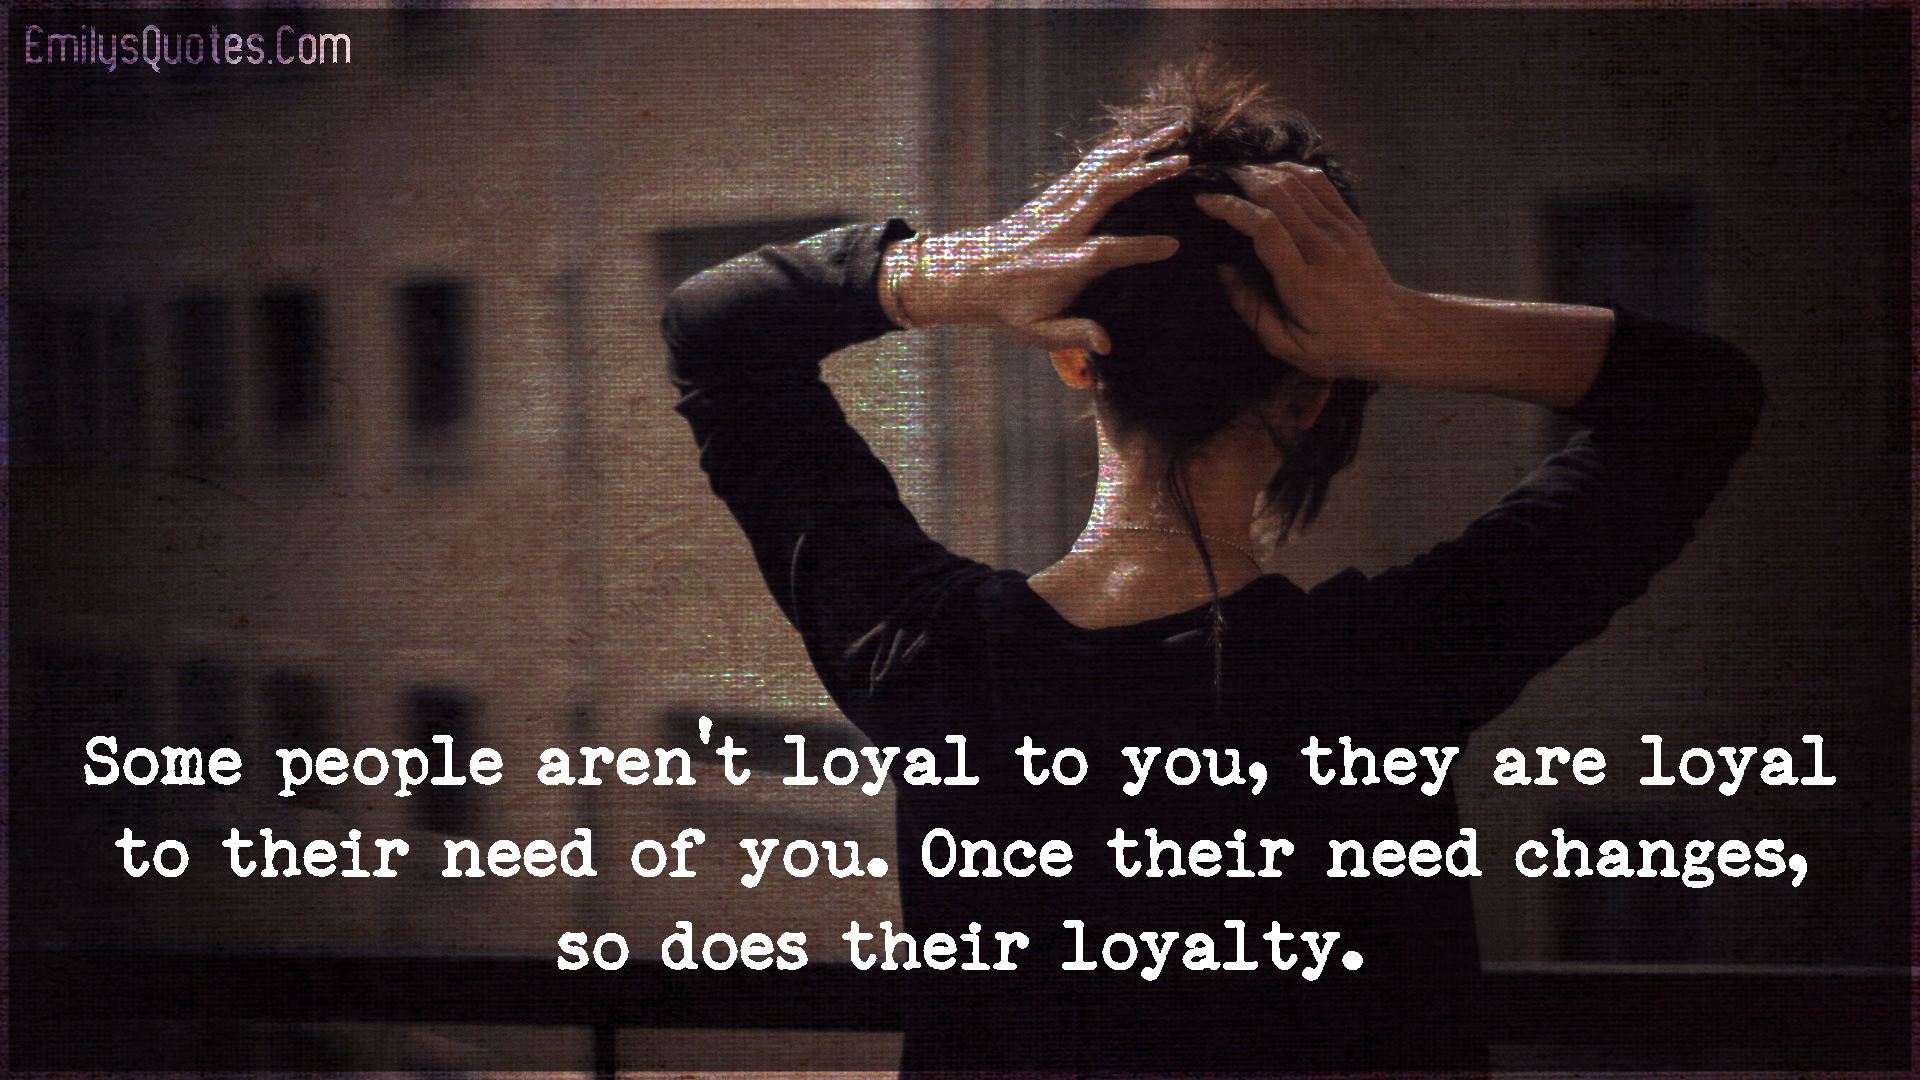 Some people aren’t loyal to you, they are loyal to their